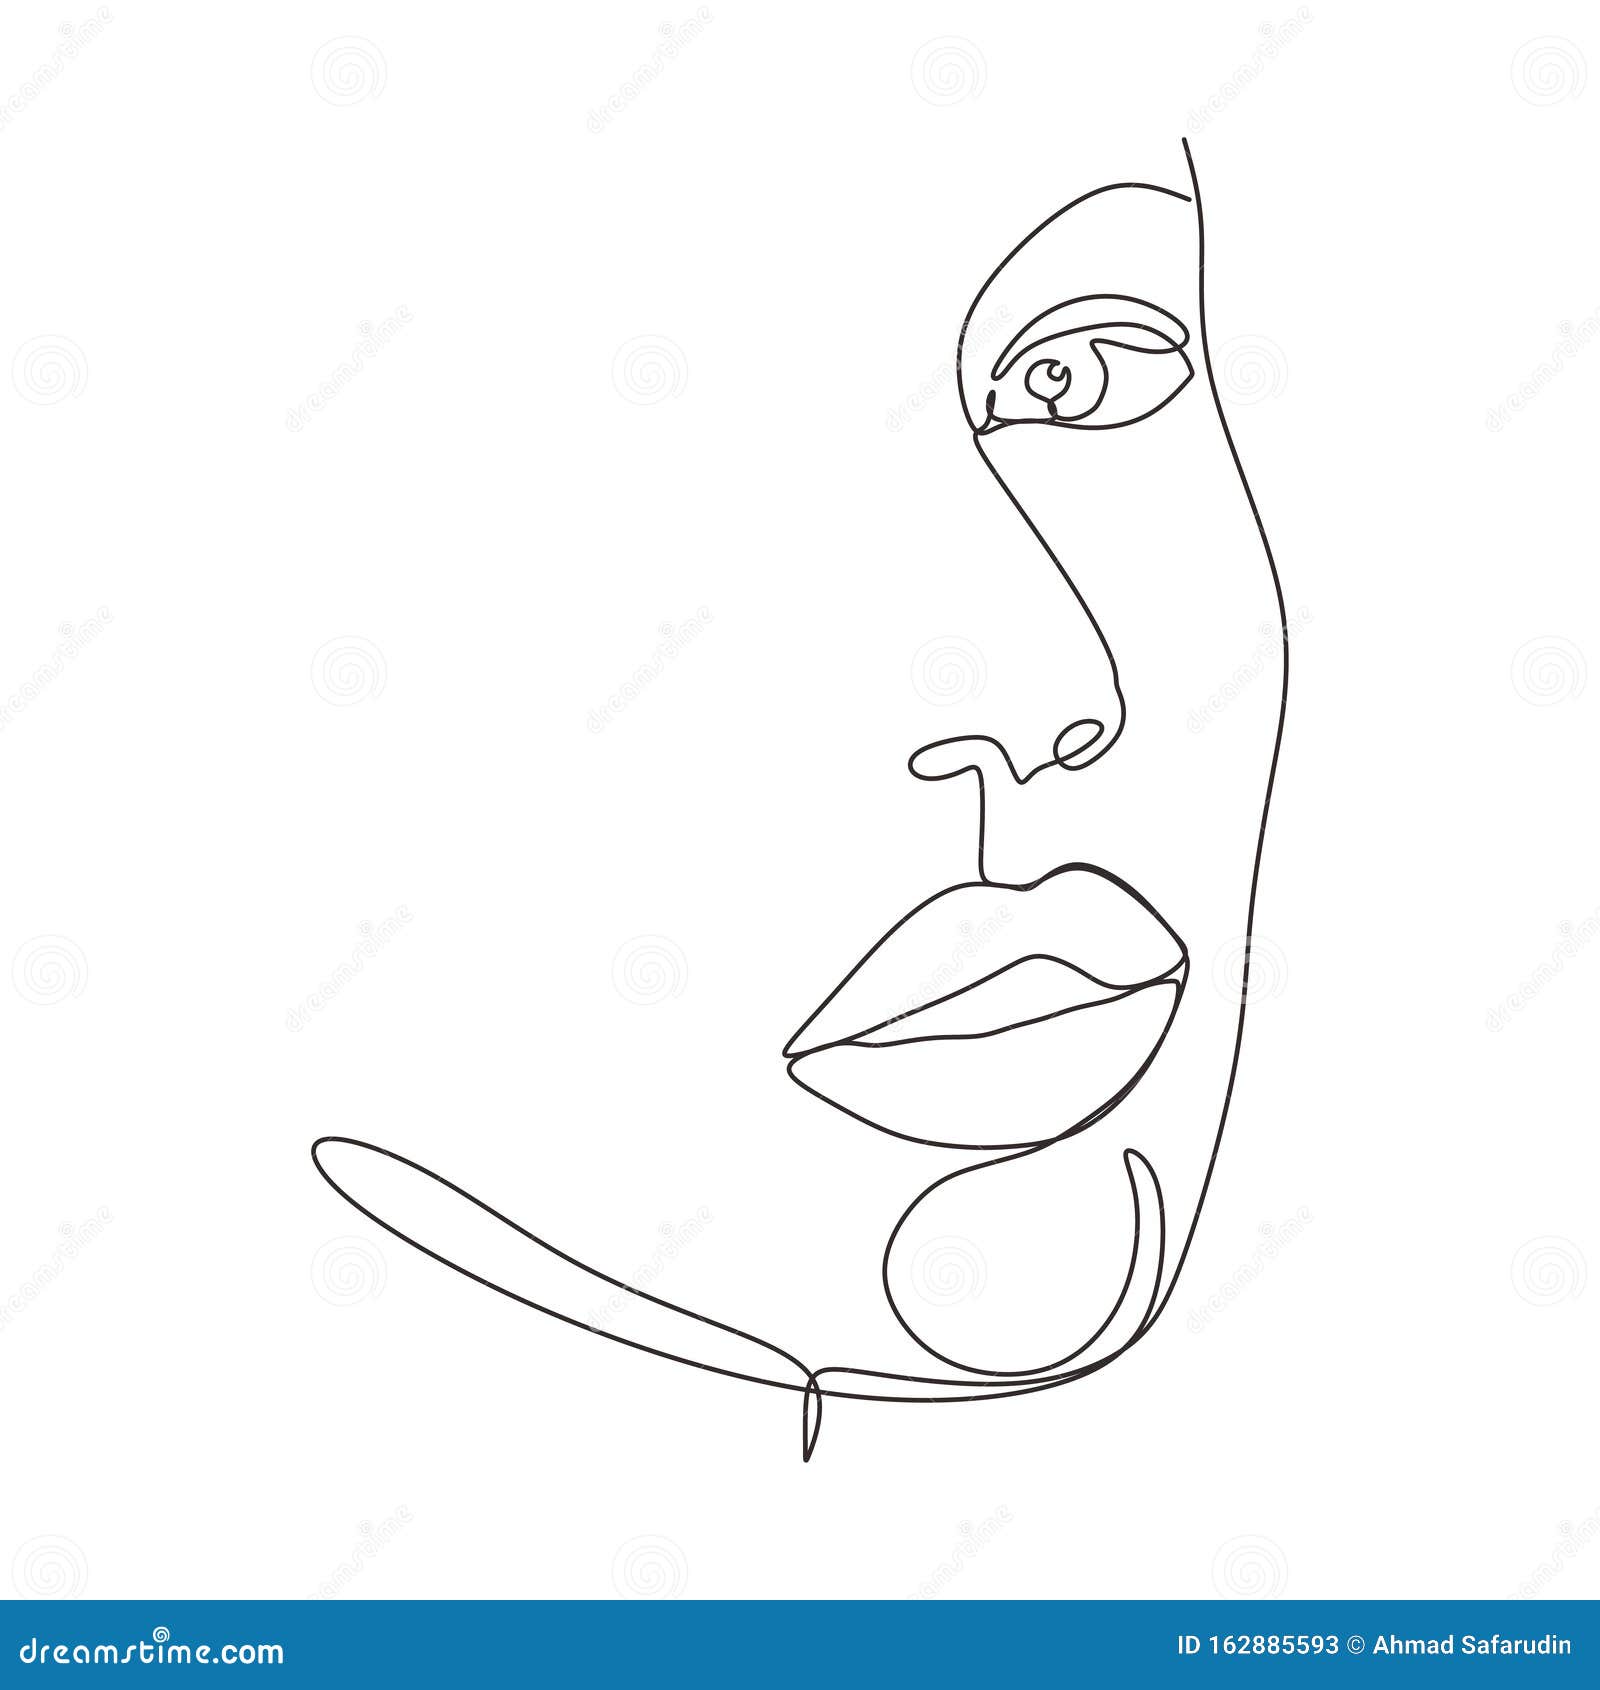 continuous one line drawing of abstract face minimalism and simplicity  . minimalist hand drawn sketch lineart